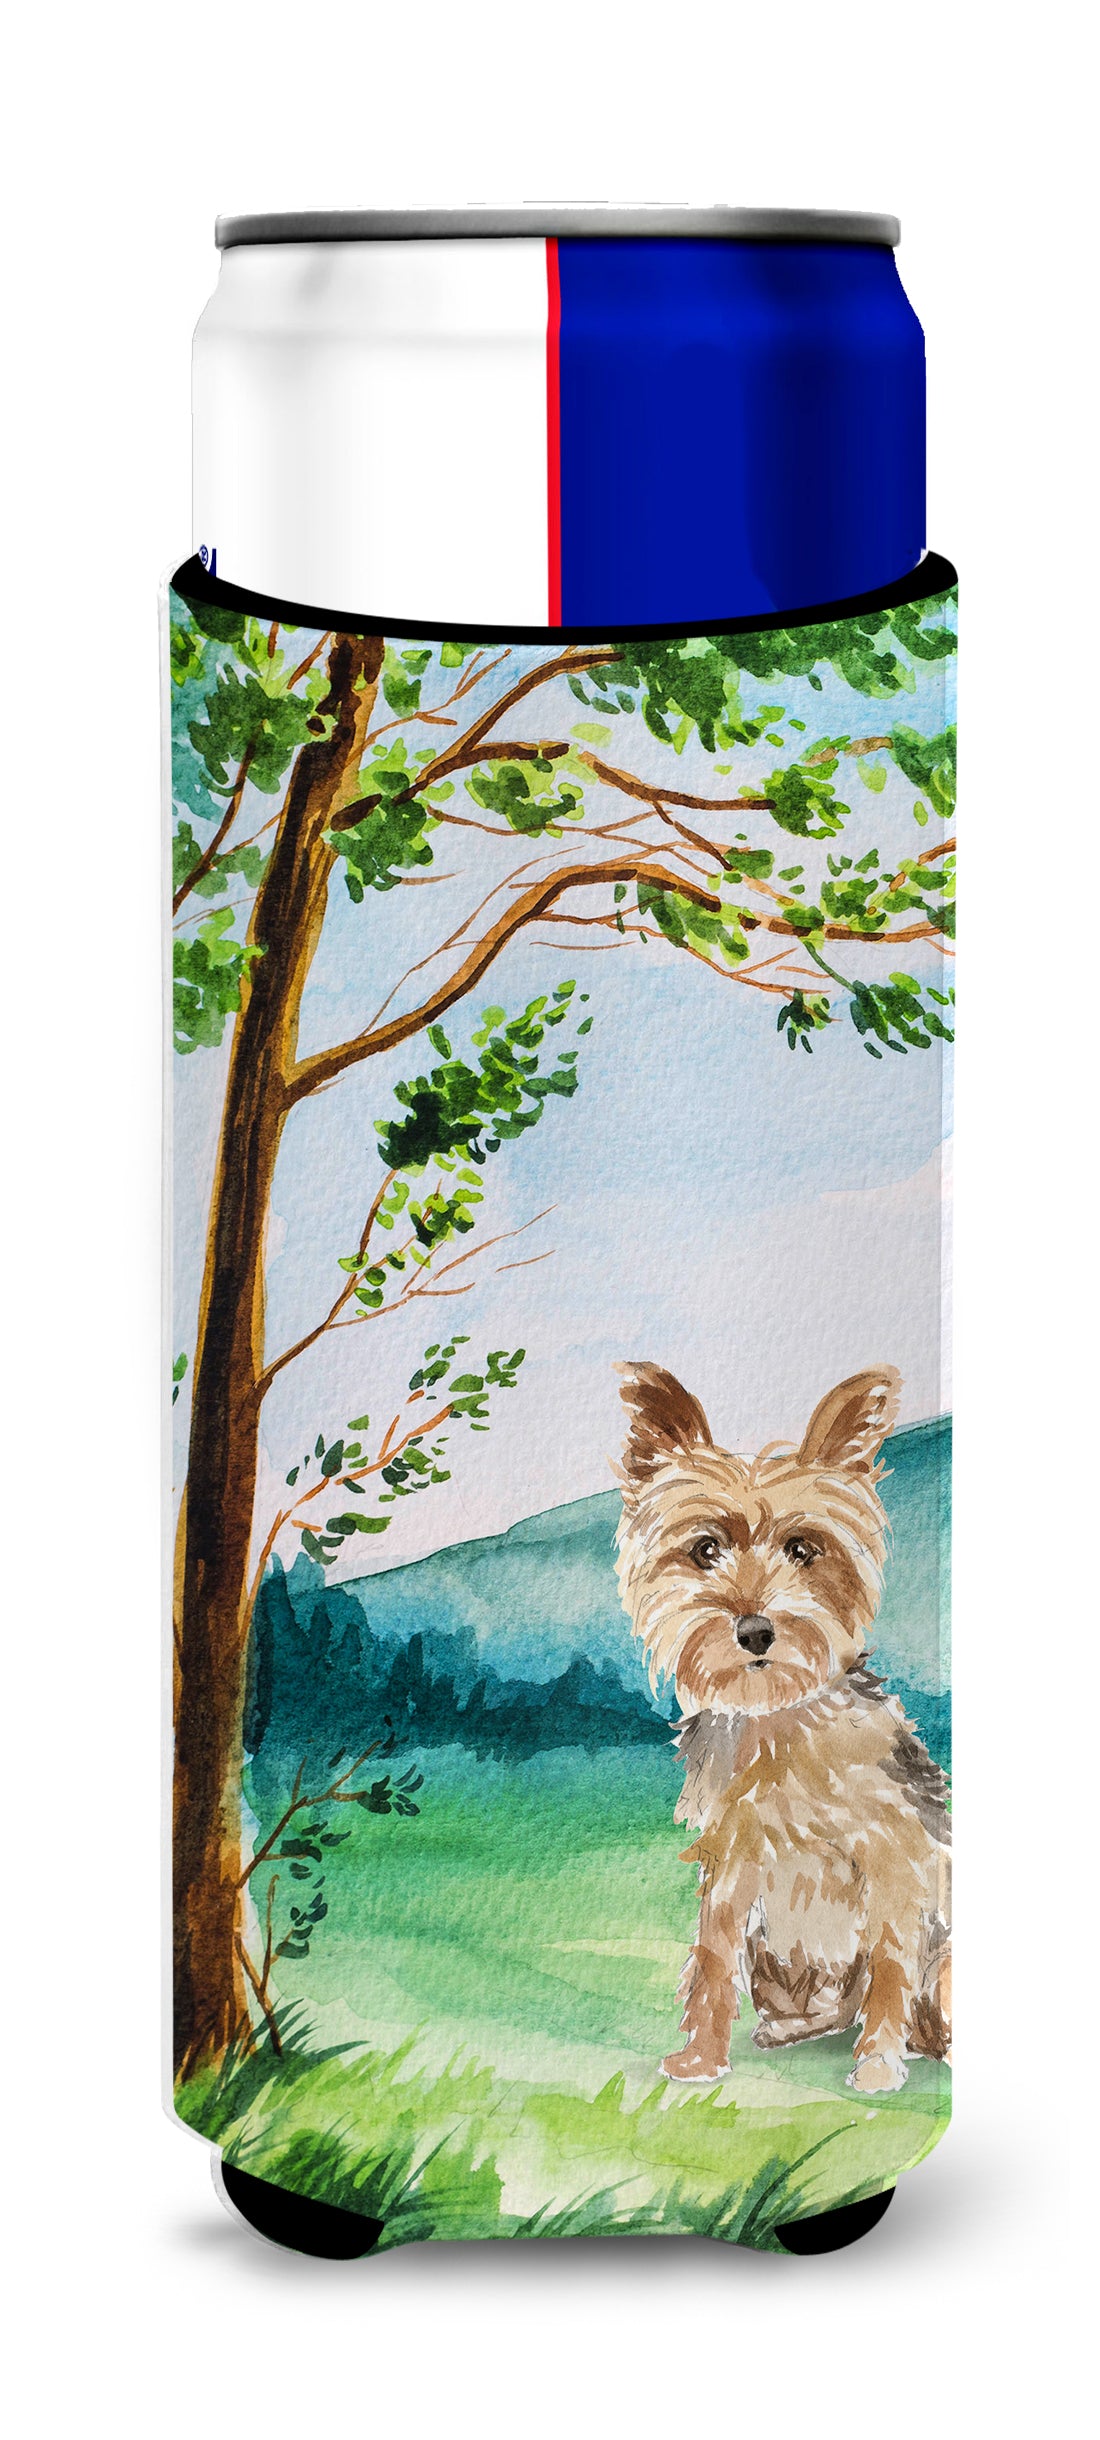 Under the Tree Yorkie Yorkshire Terrier  Ultra Hugger for slim cans CK2549MUK